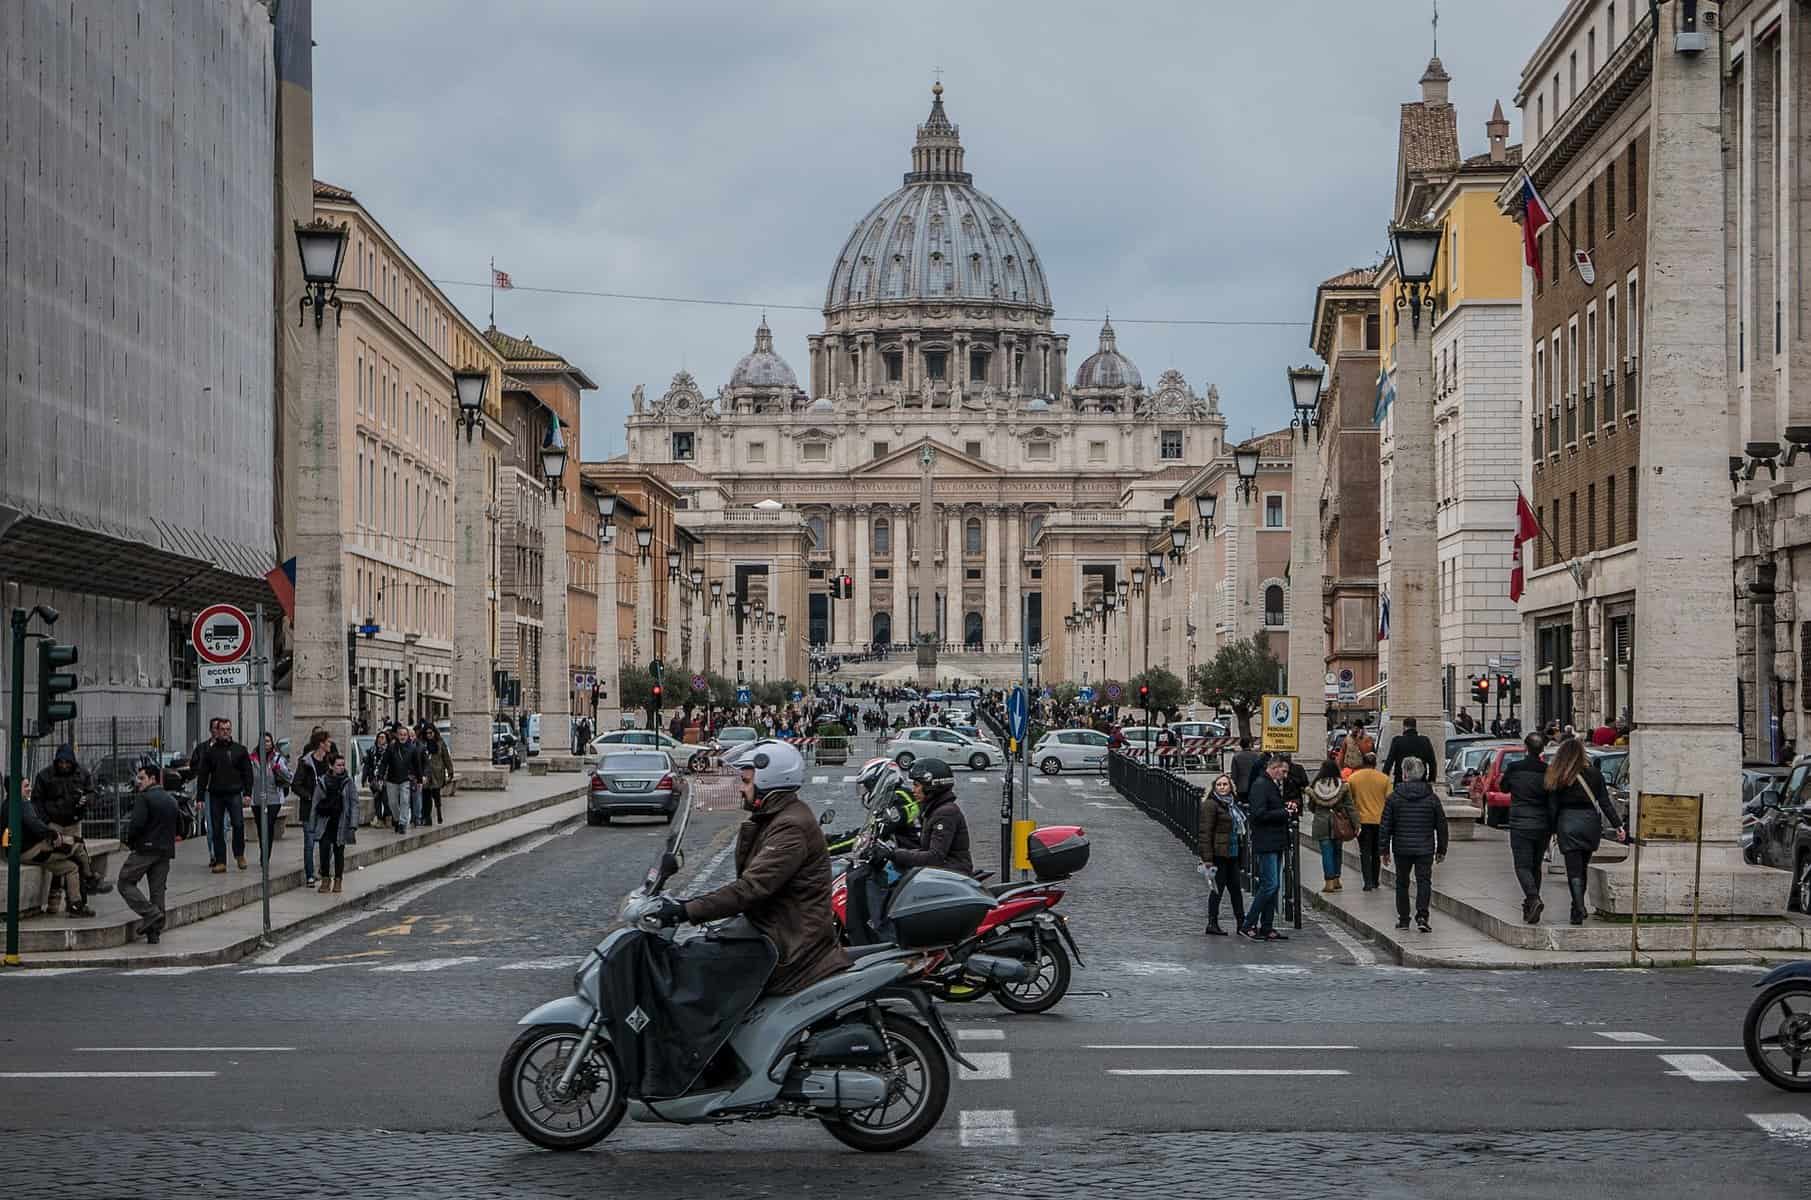 A motorbike and cars are shown in the foreground on a street with the Vatican dome in the distance.